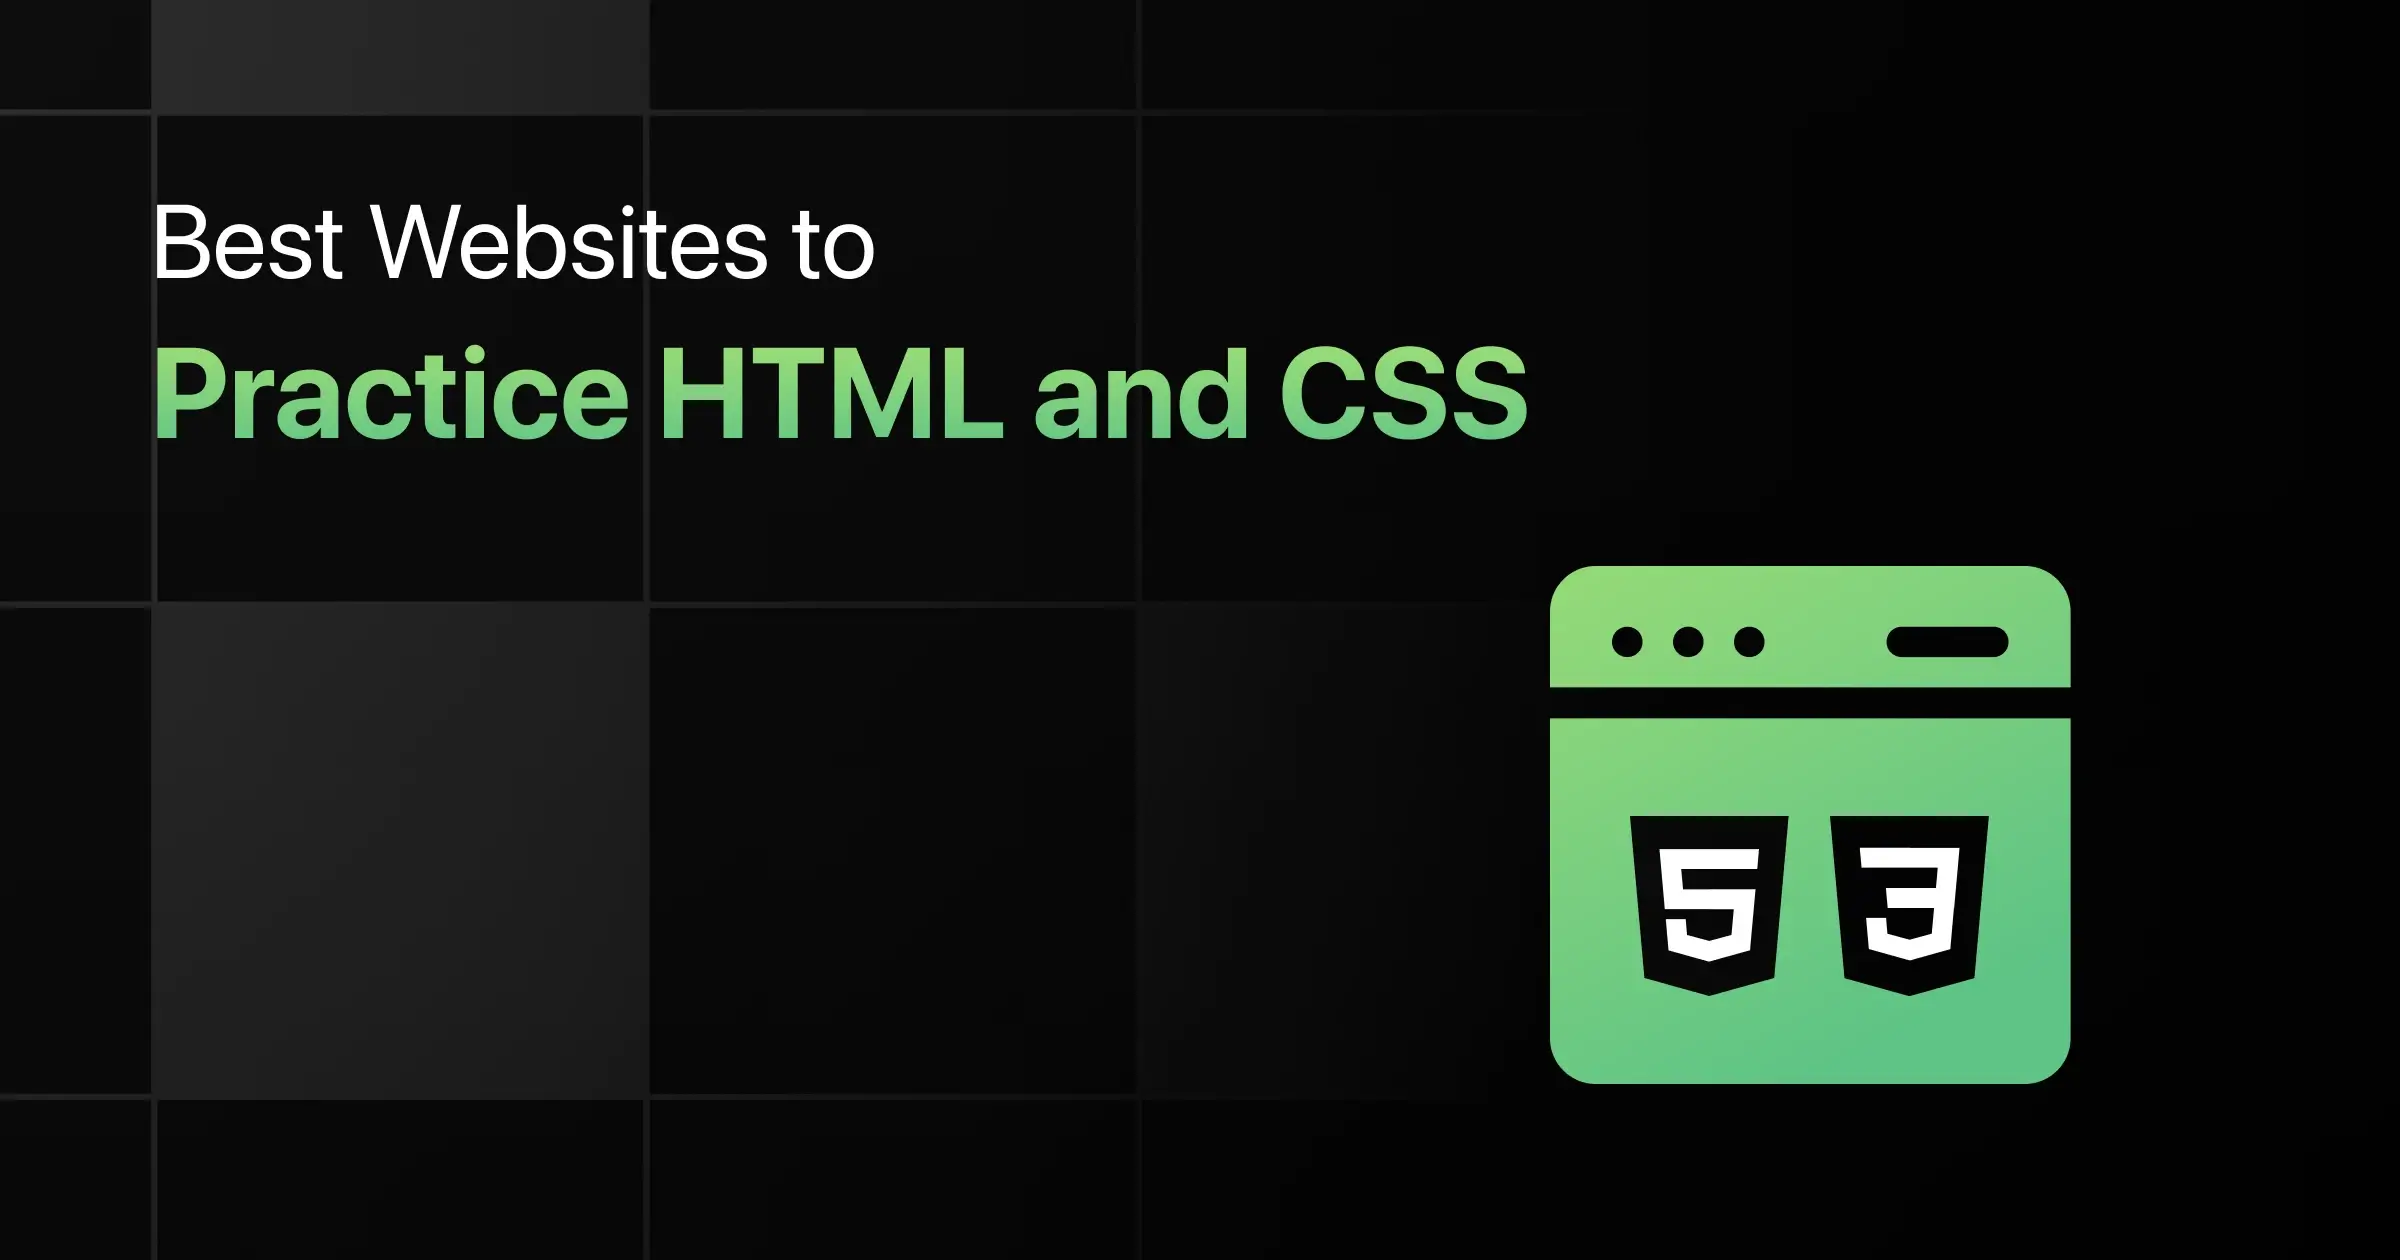 Best Websites to Practice HTML and CSS